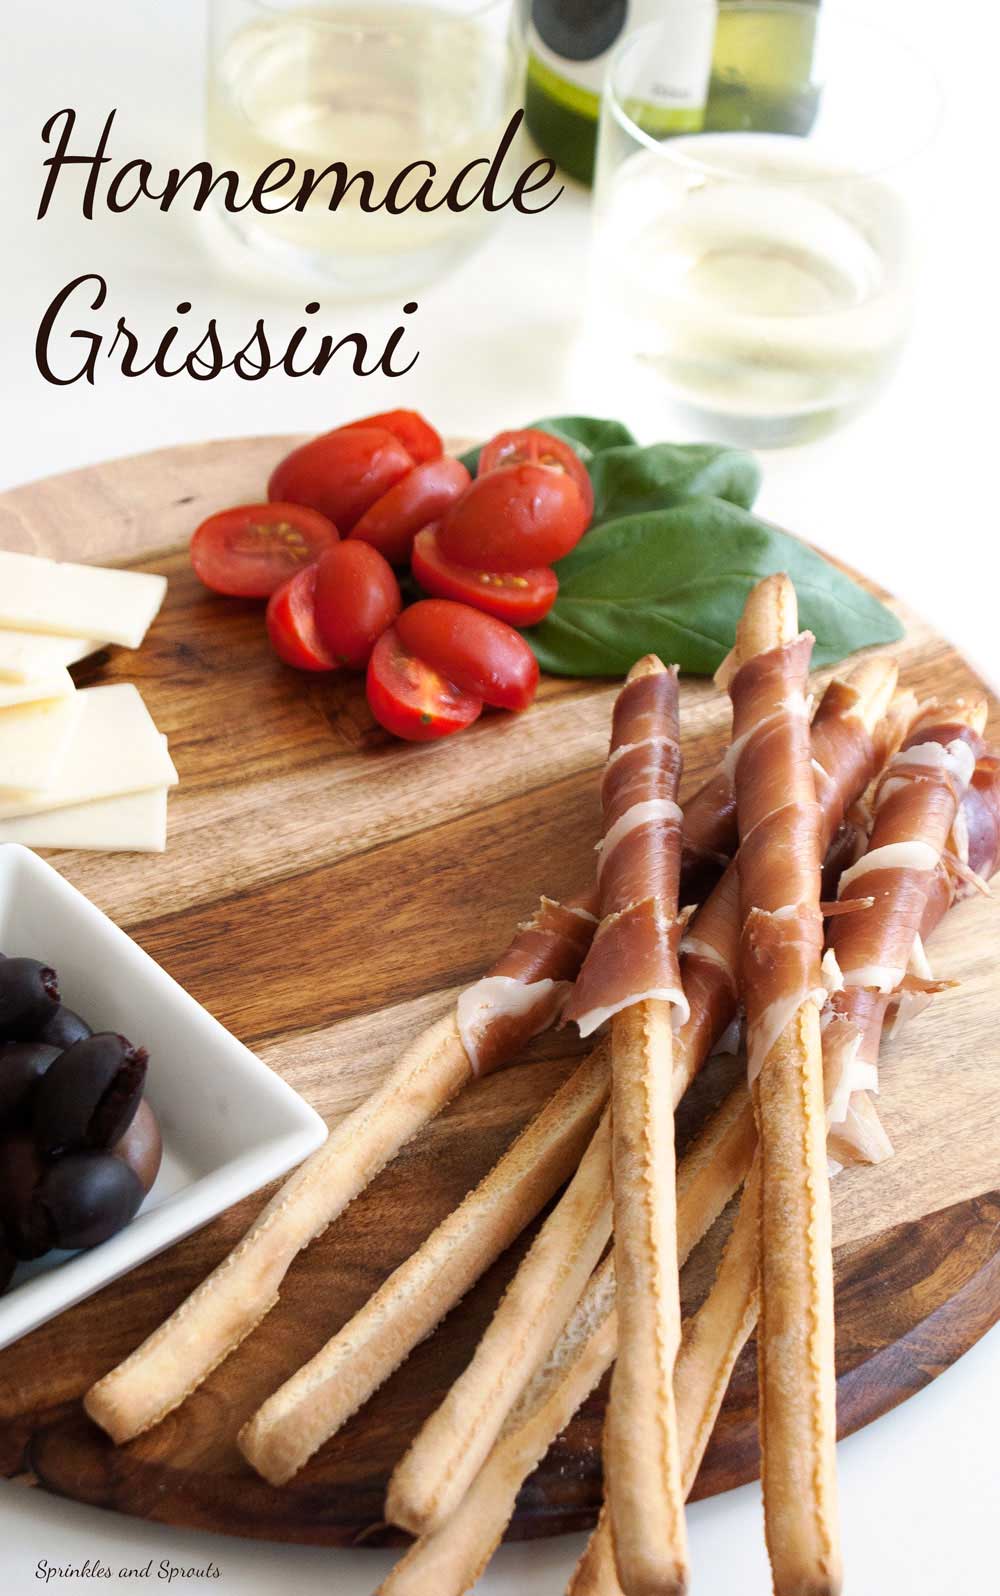 Homemade Grissini. Gnarly, crunchy breadsticks perfect for dipping. Wrap them in prosciutto for an elegant and easy entertaining idea.